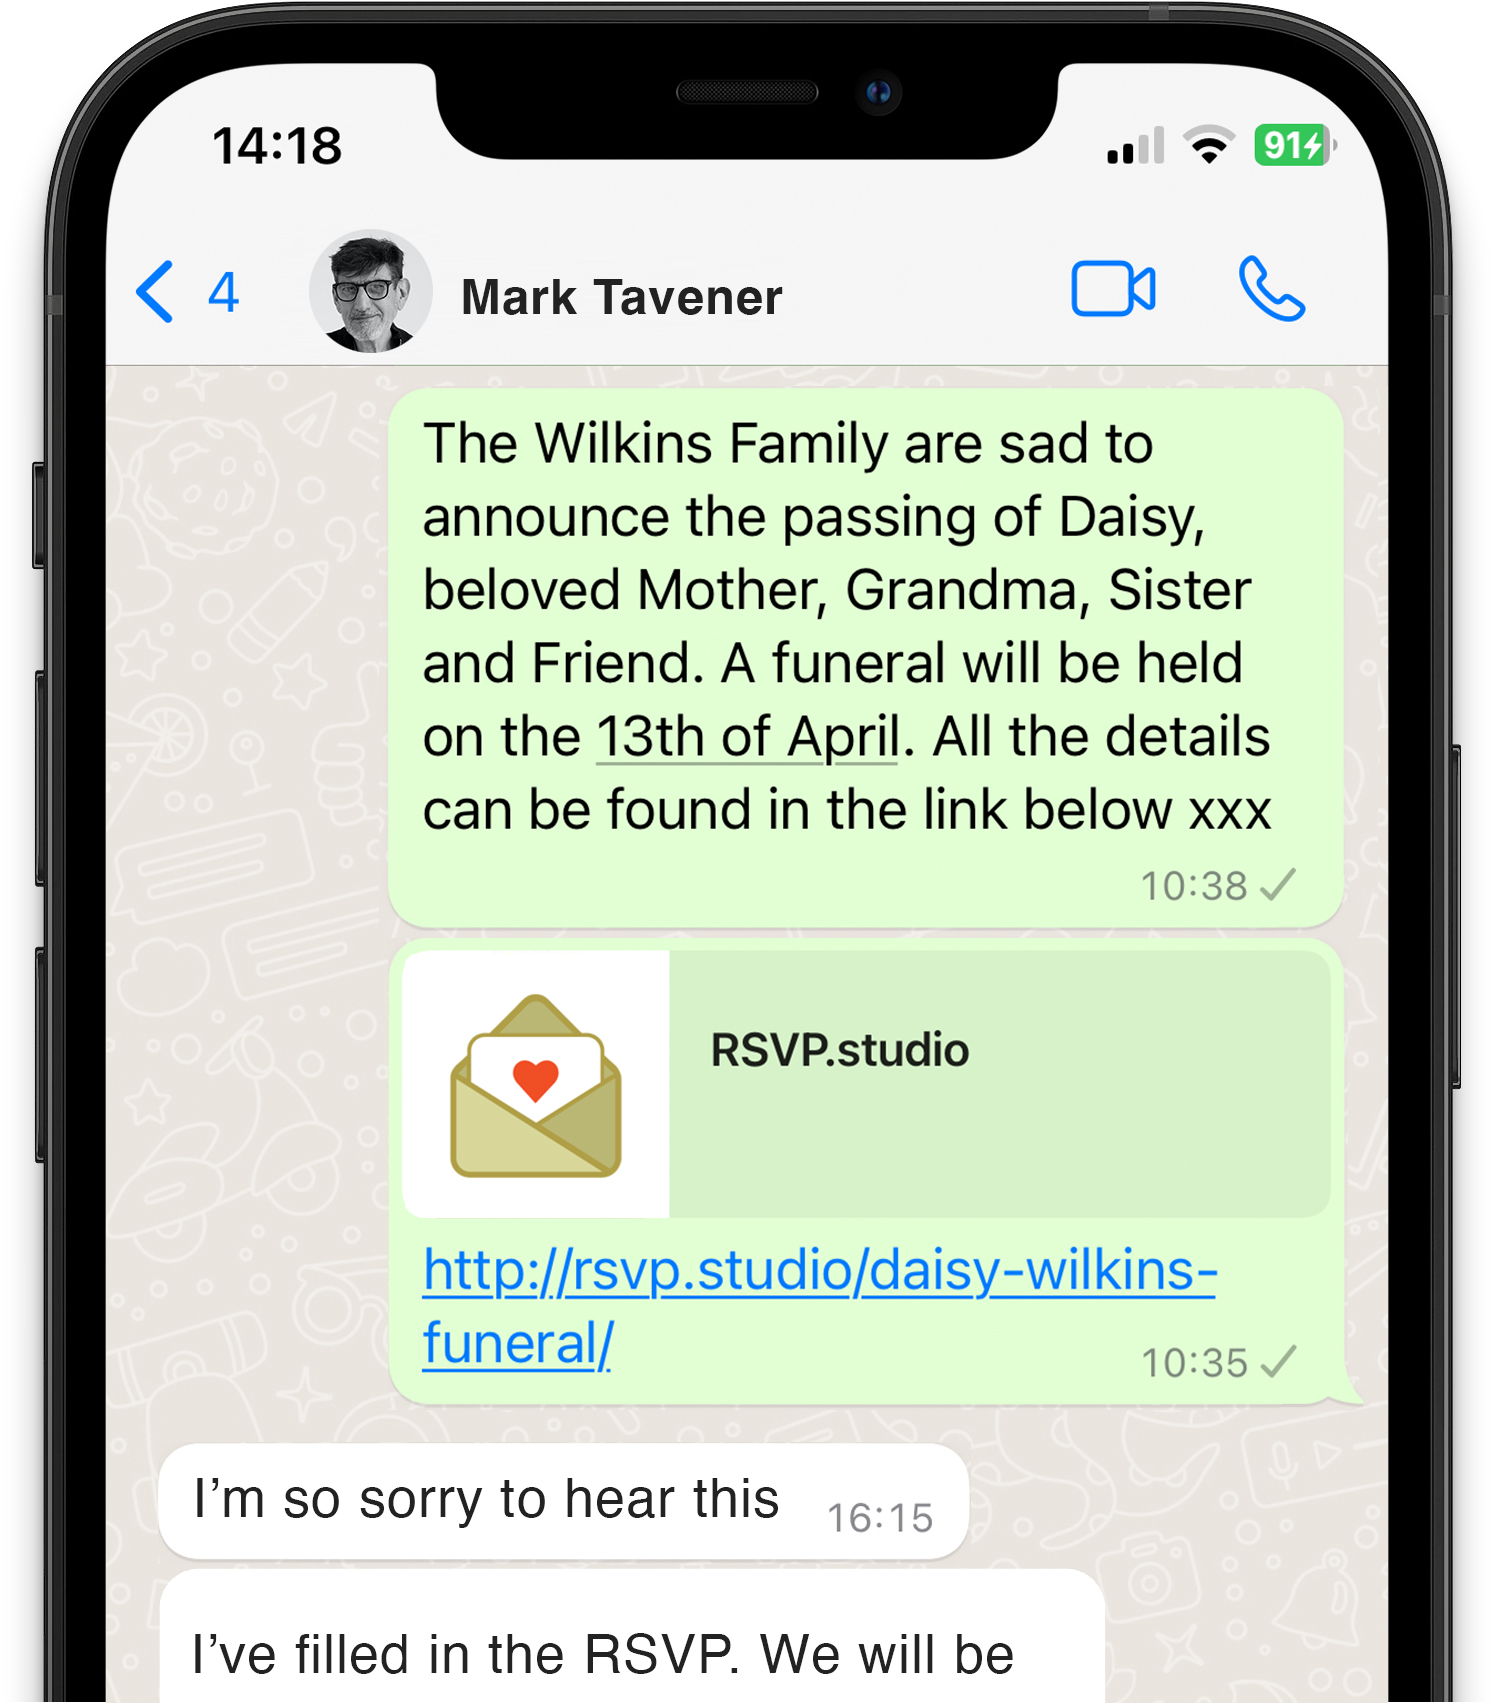 WhatsApp chat screen showing a digital RSVP invitation for a funeral